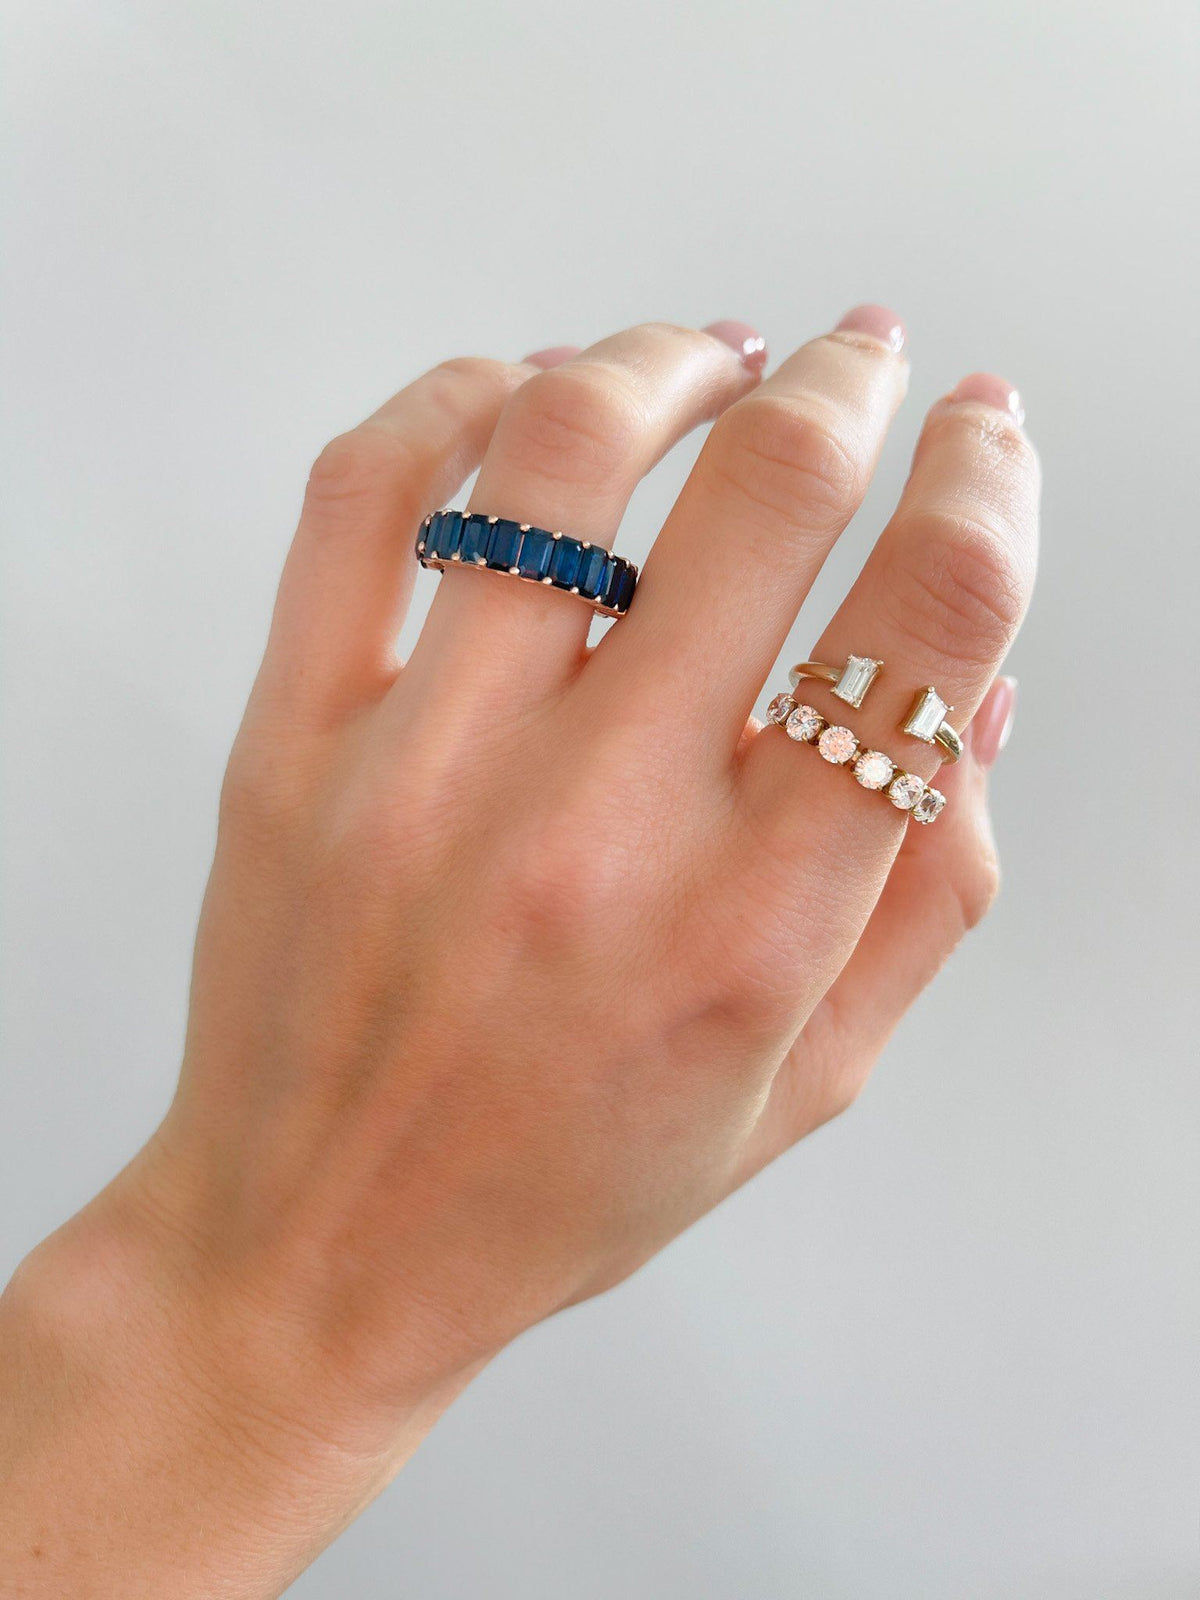 Reversible Sapphire Eternity Band by Good Stone available in Gold and Platinum